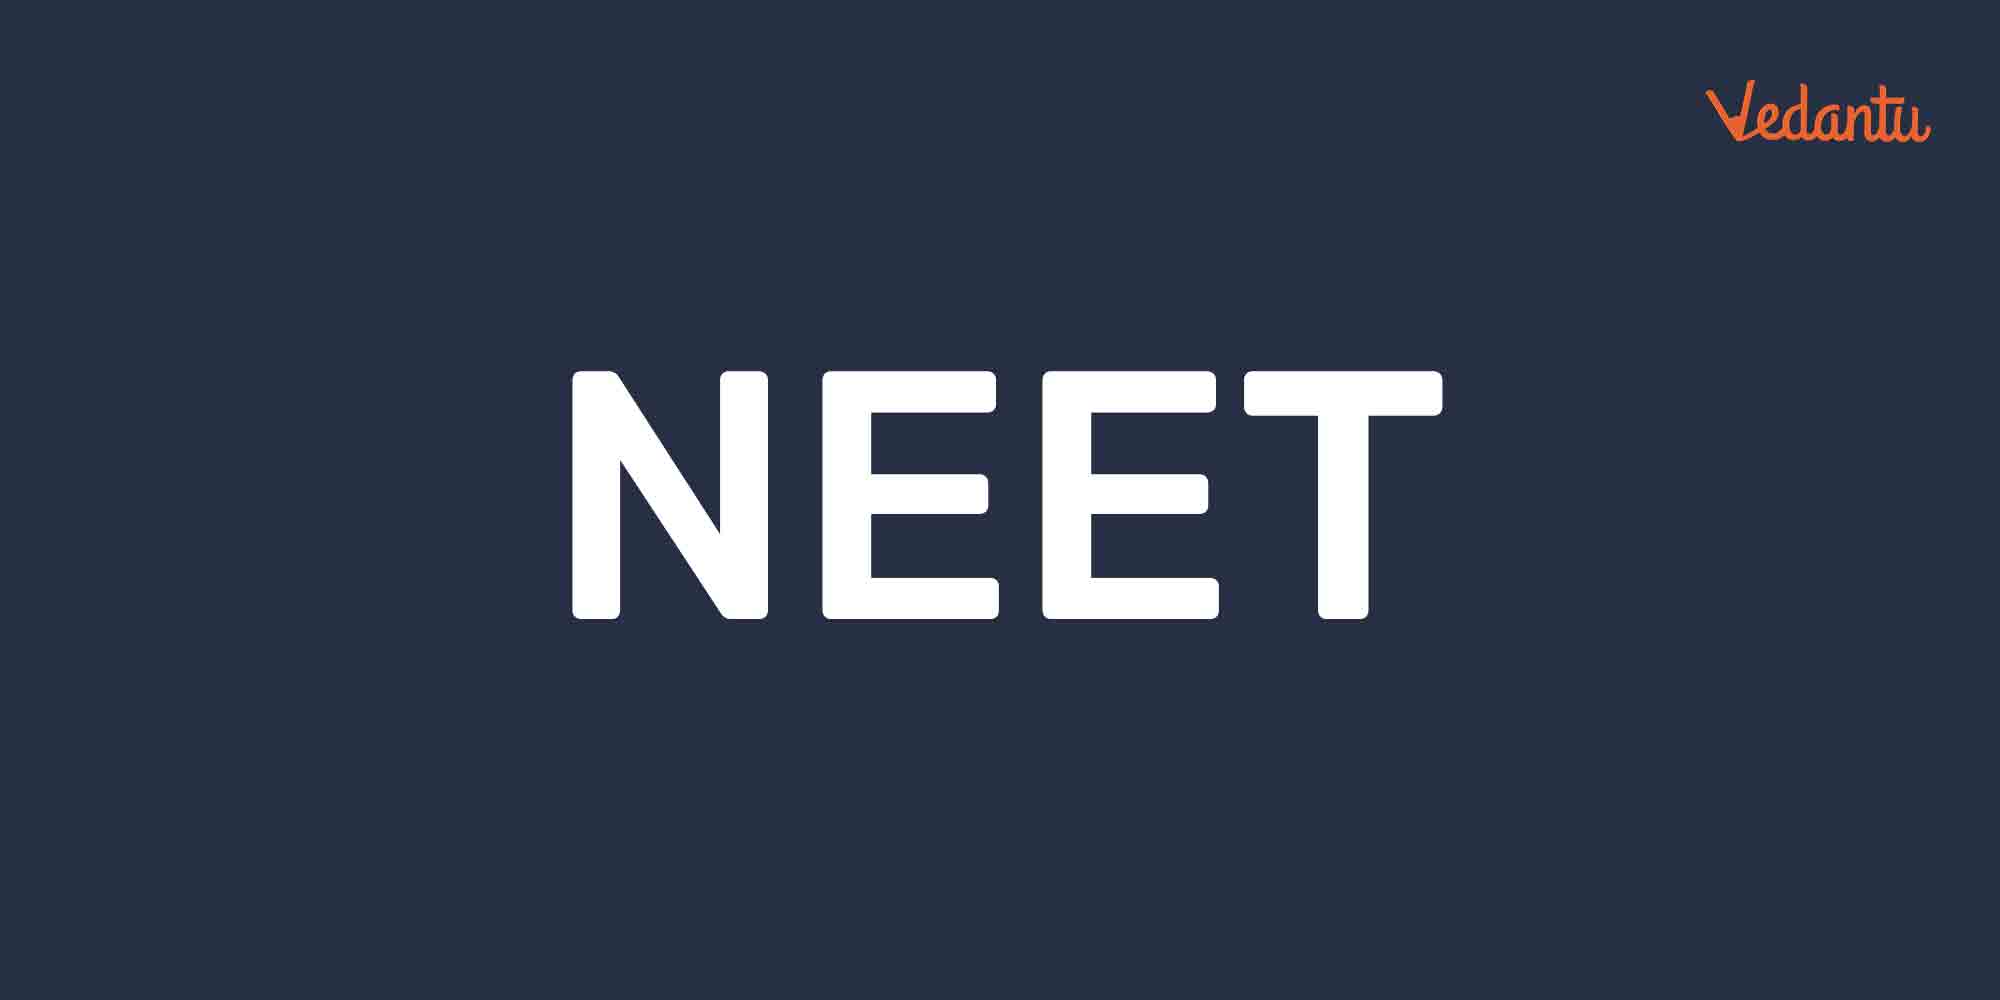 How Many Physics Questions in NEET Come From NCERT or of NCERT Type?